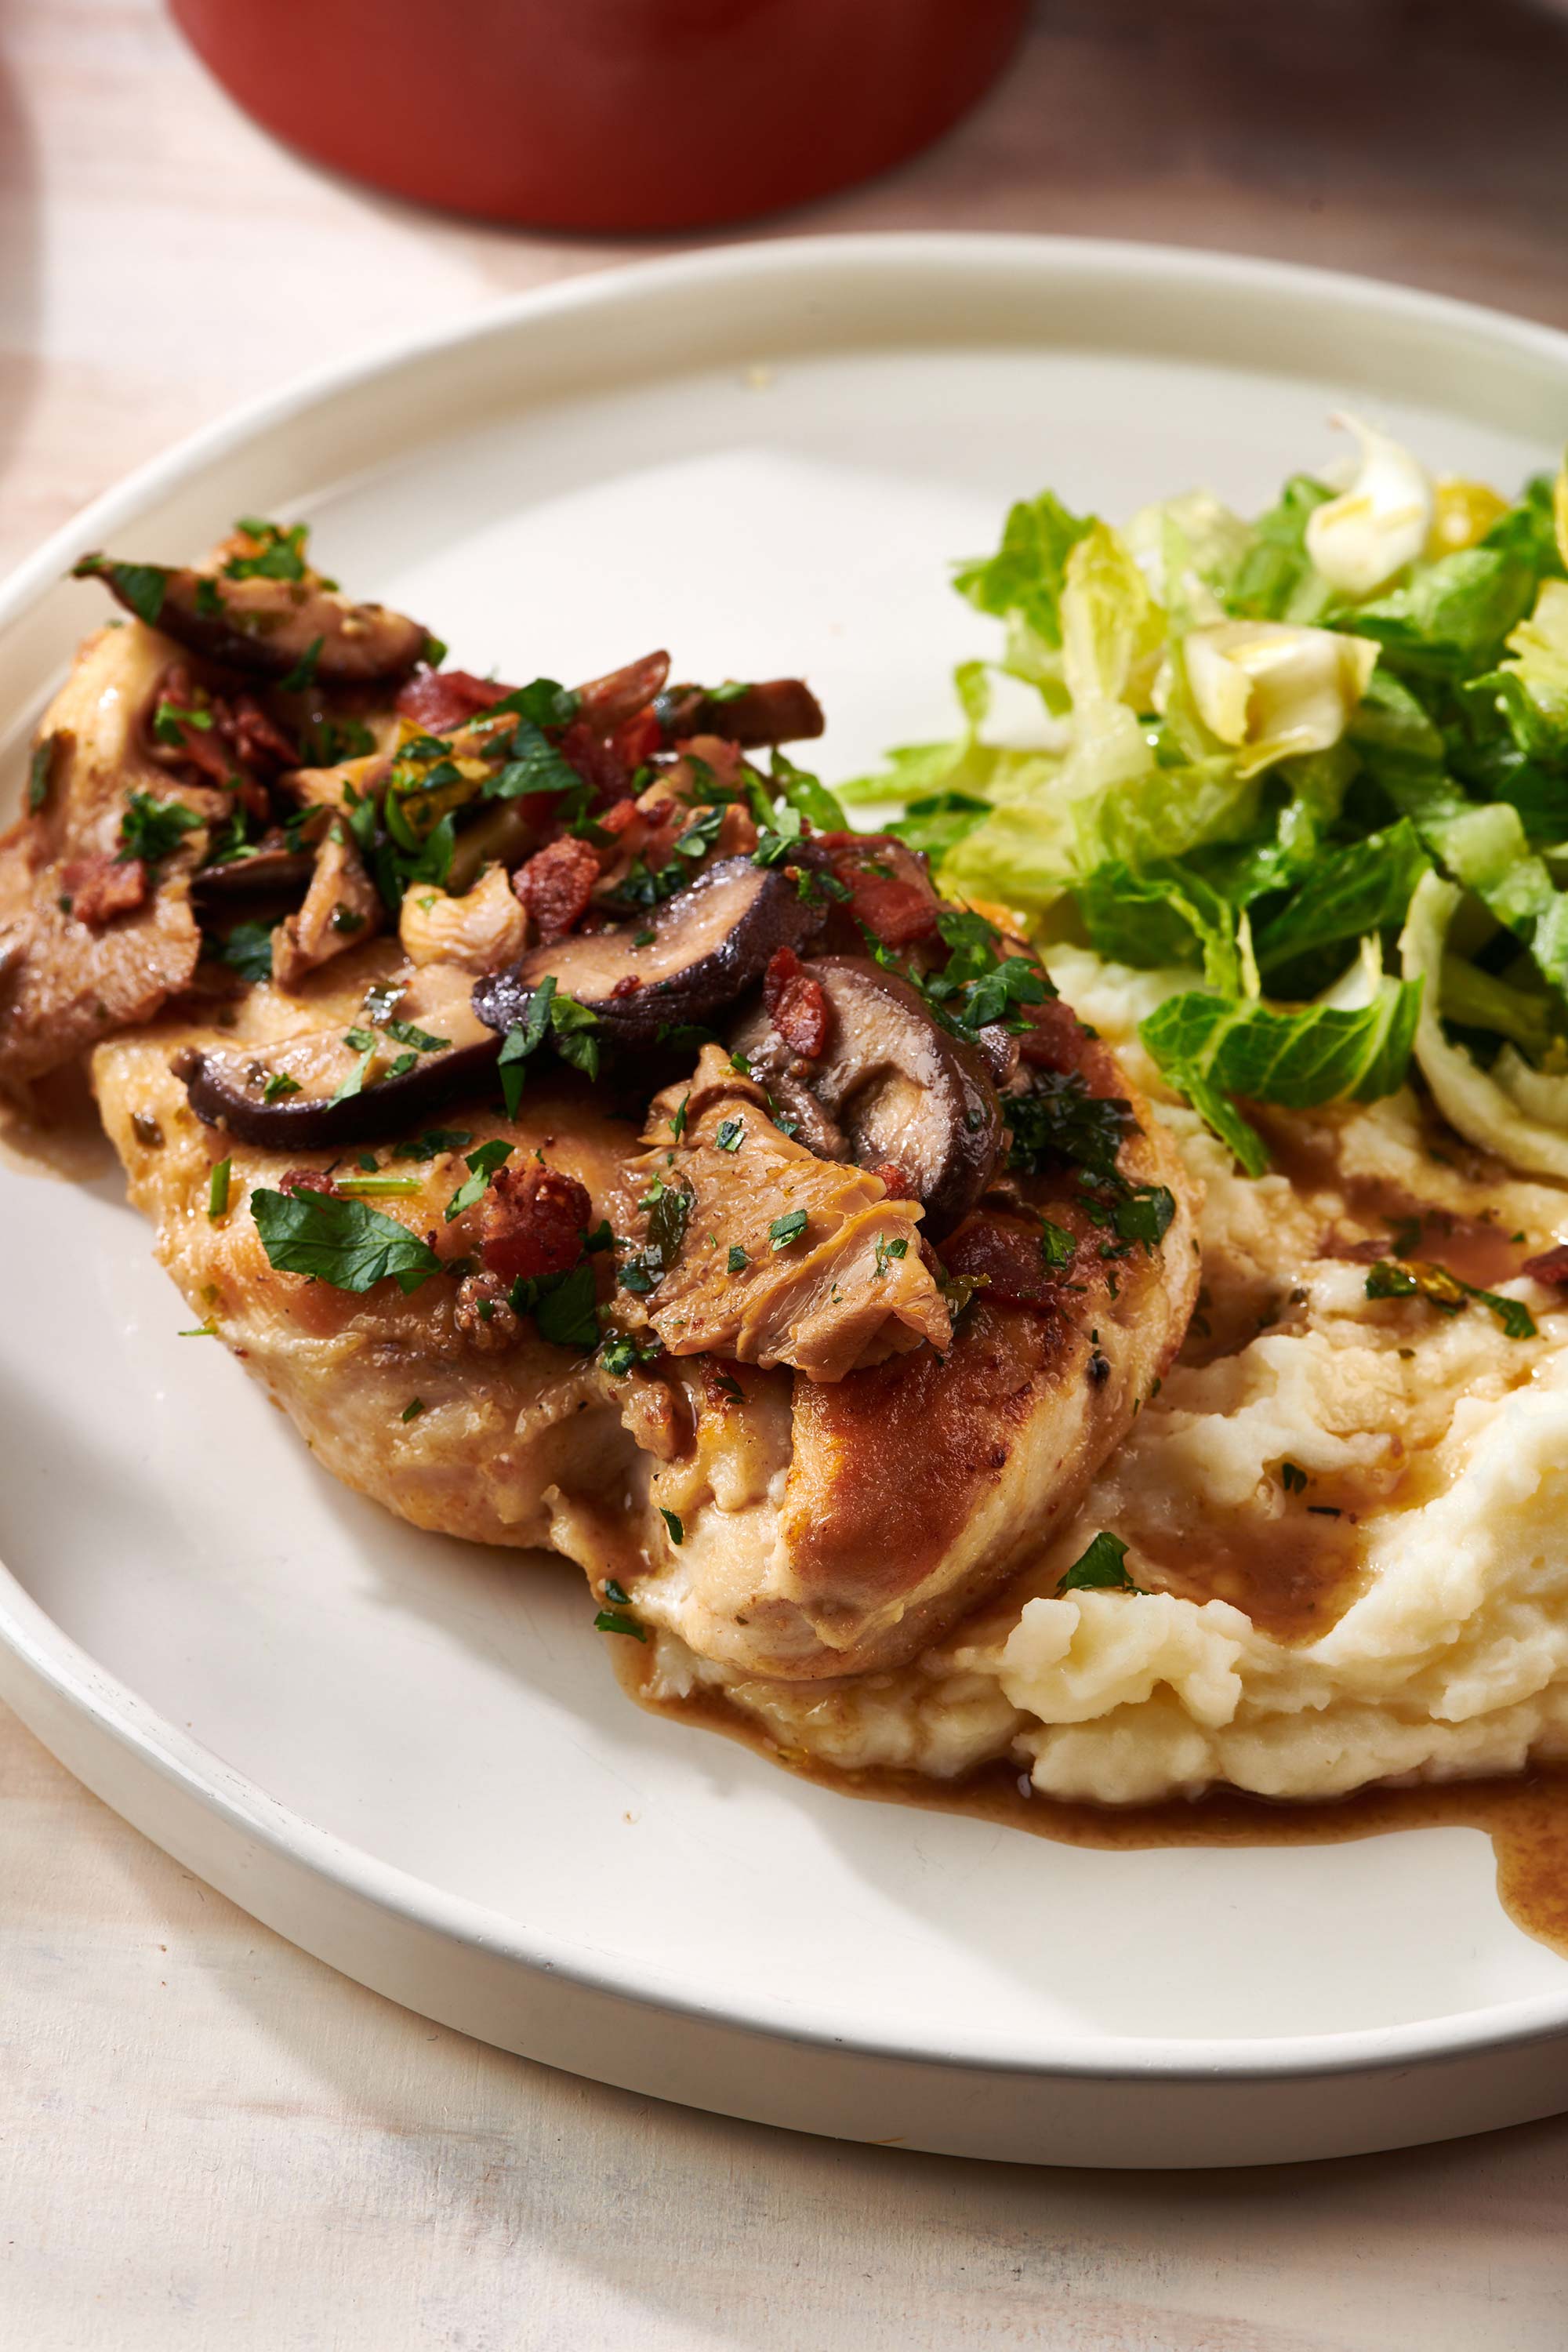 Chicken Marsala, mashed potatoes, and salad on a plate.